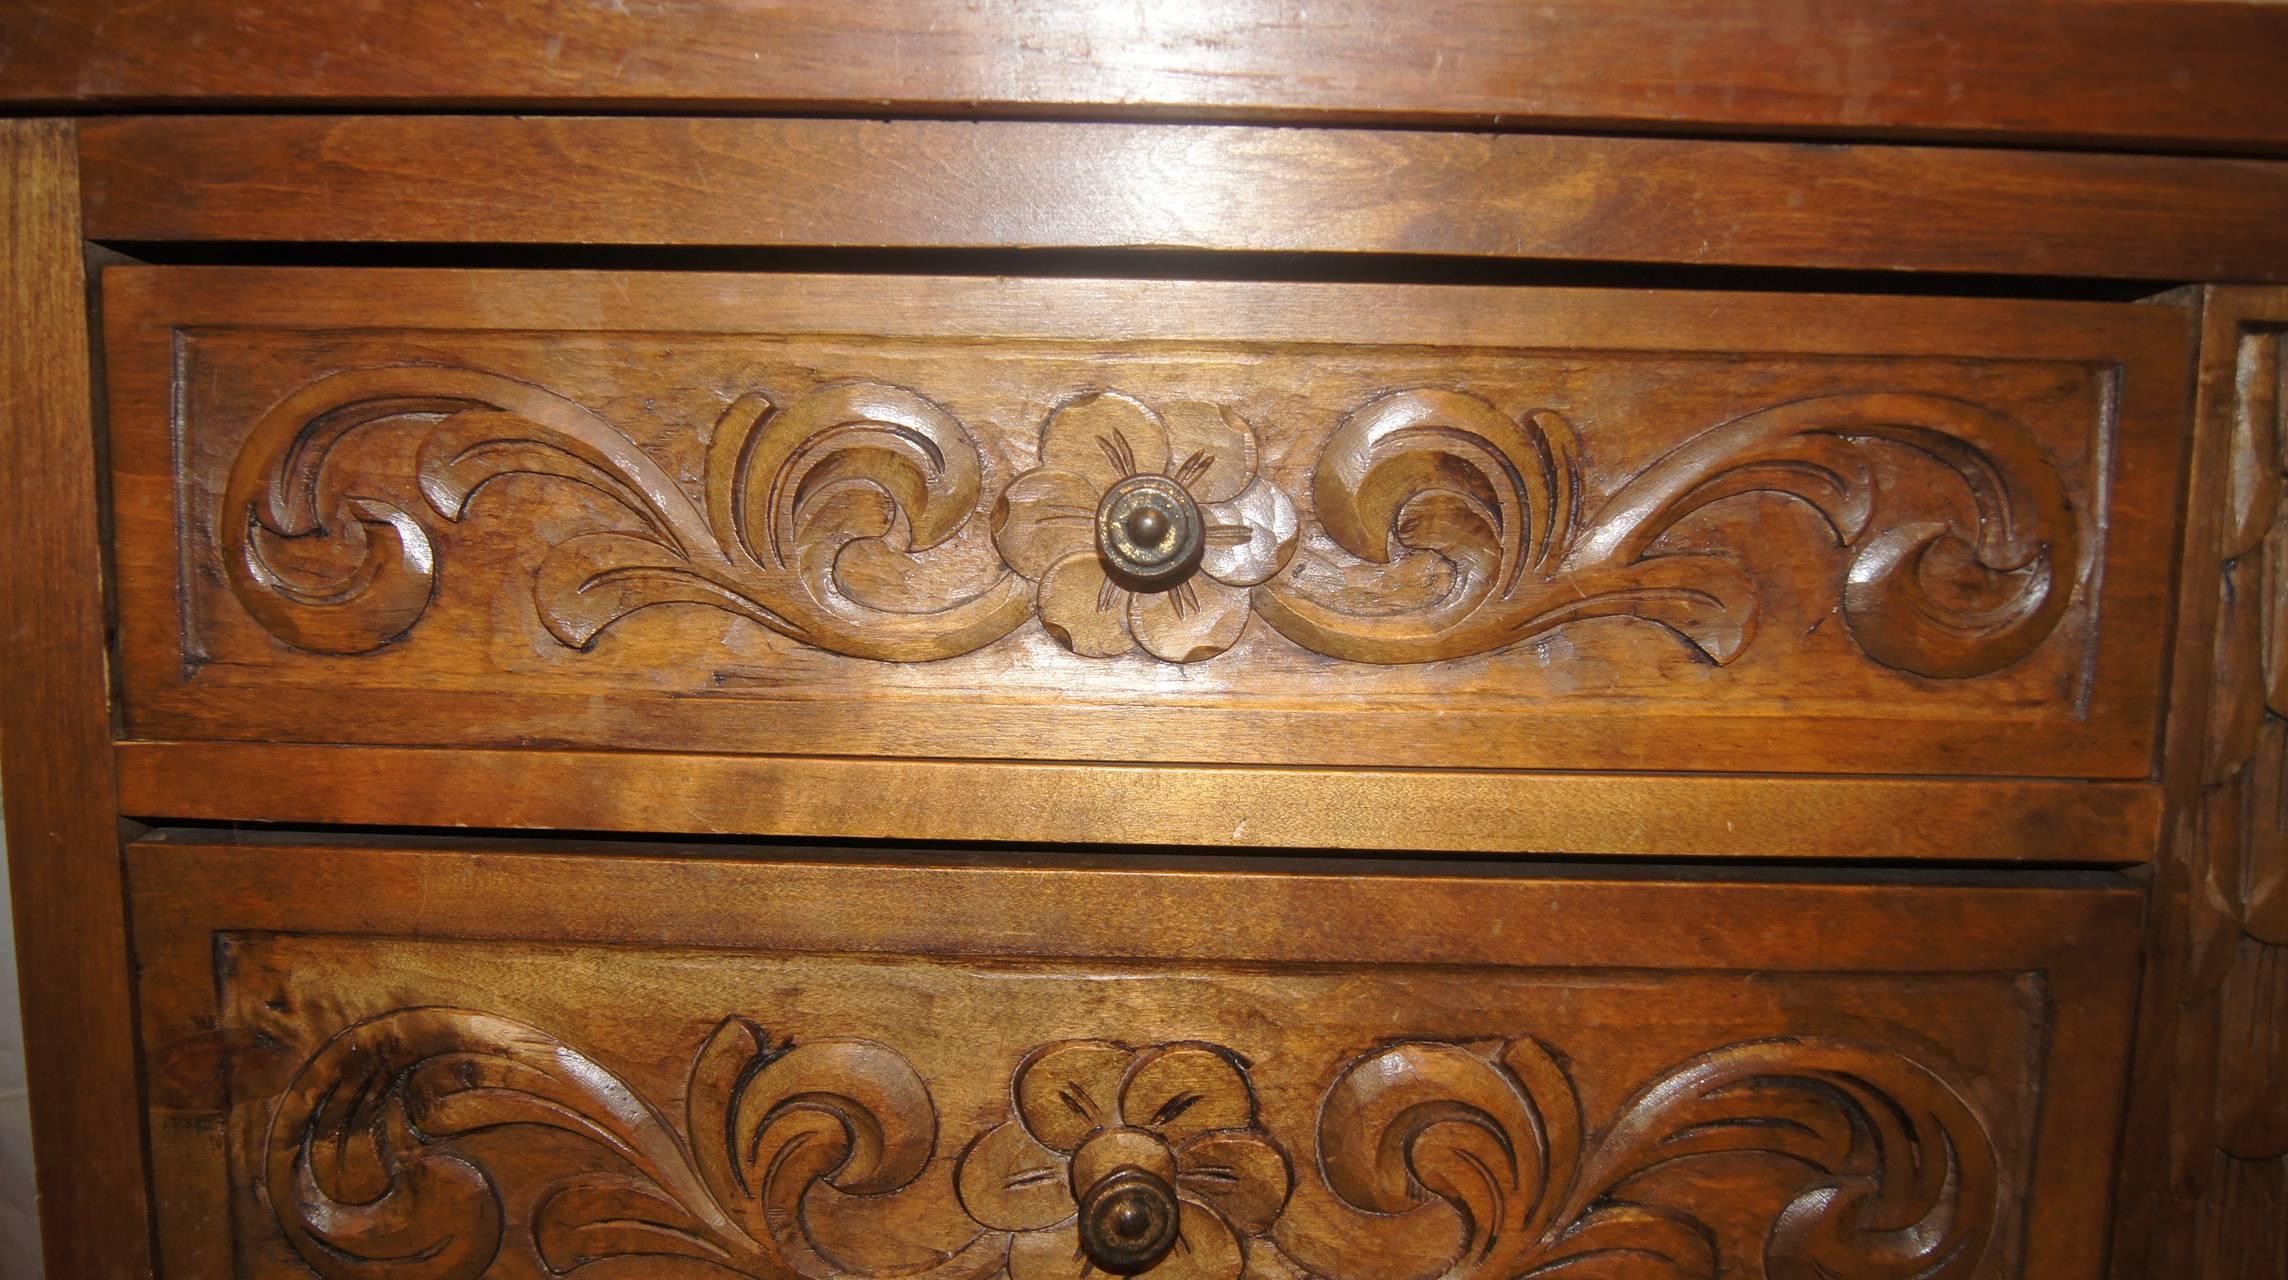 An Italian, circa 1920 carved wood chest of drawers with foliage motif.

Measurements:
Height: 34